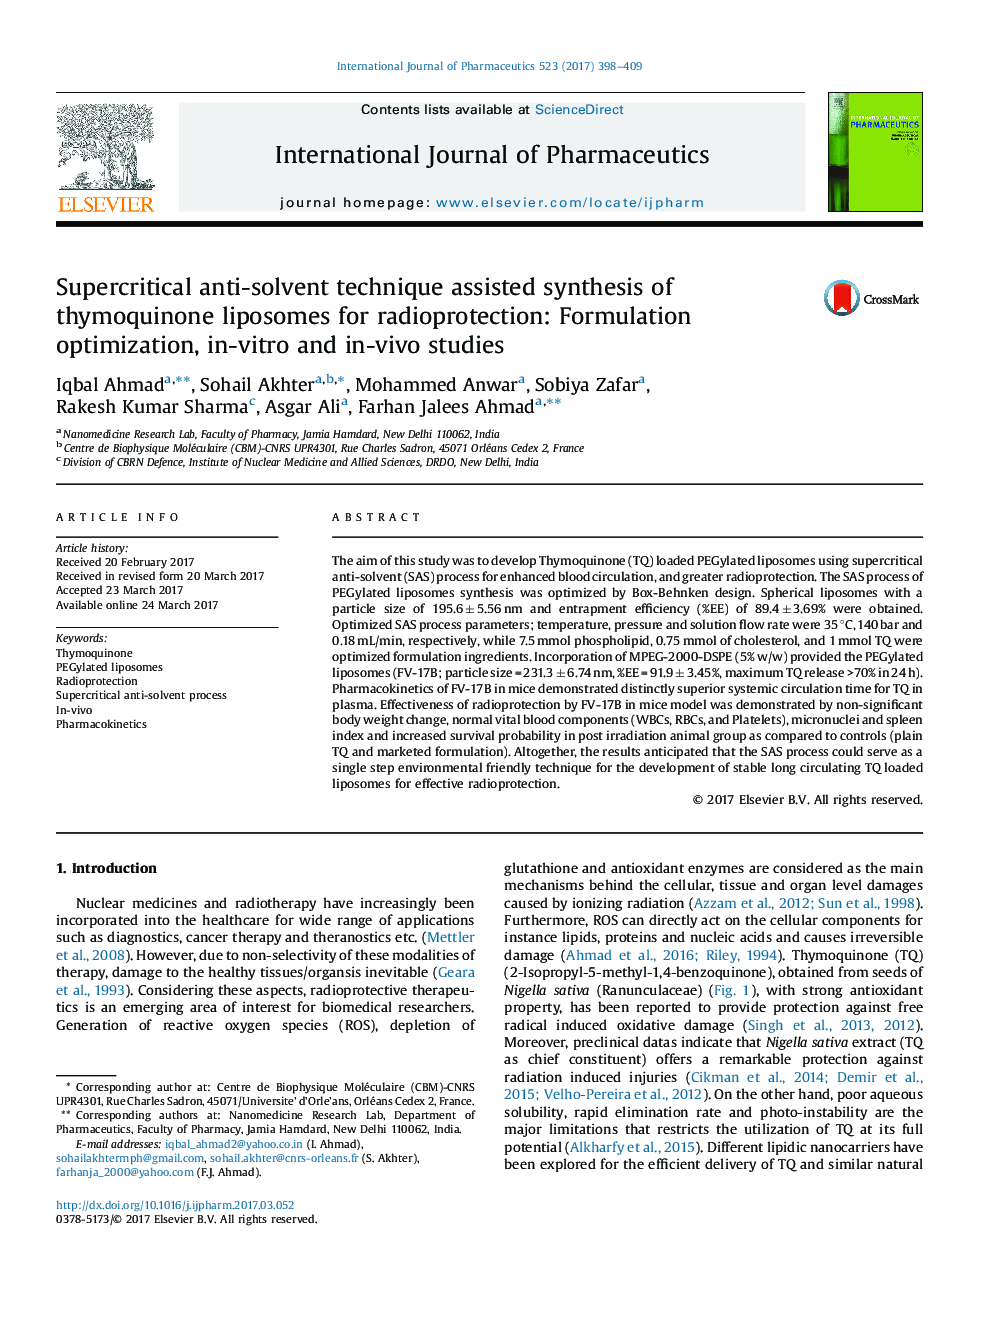 Supercritical anti-solvent technique assisted synthesis of thymoquinone liposomes for radioprotection: Formulation optimization, in-vitro and in-vivo studies